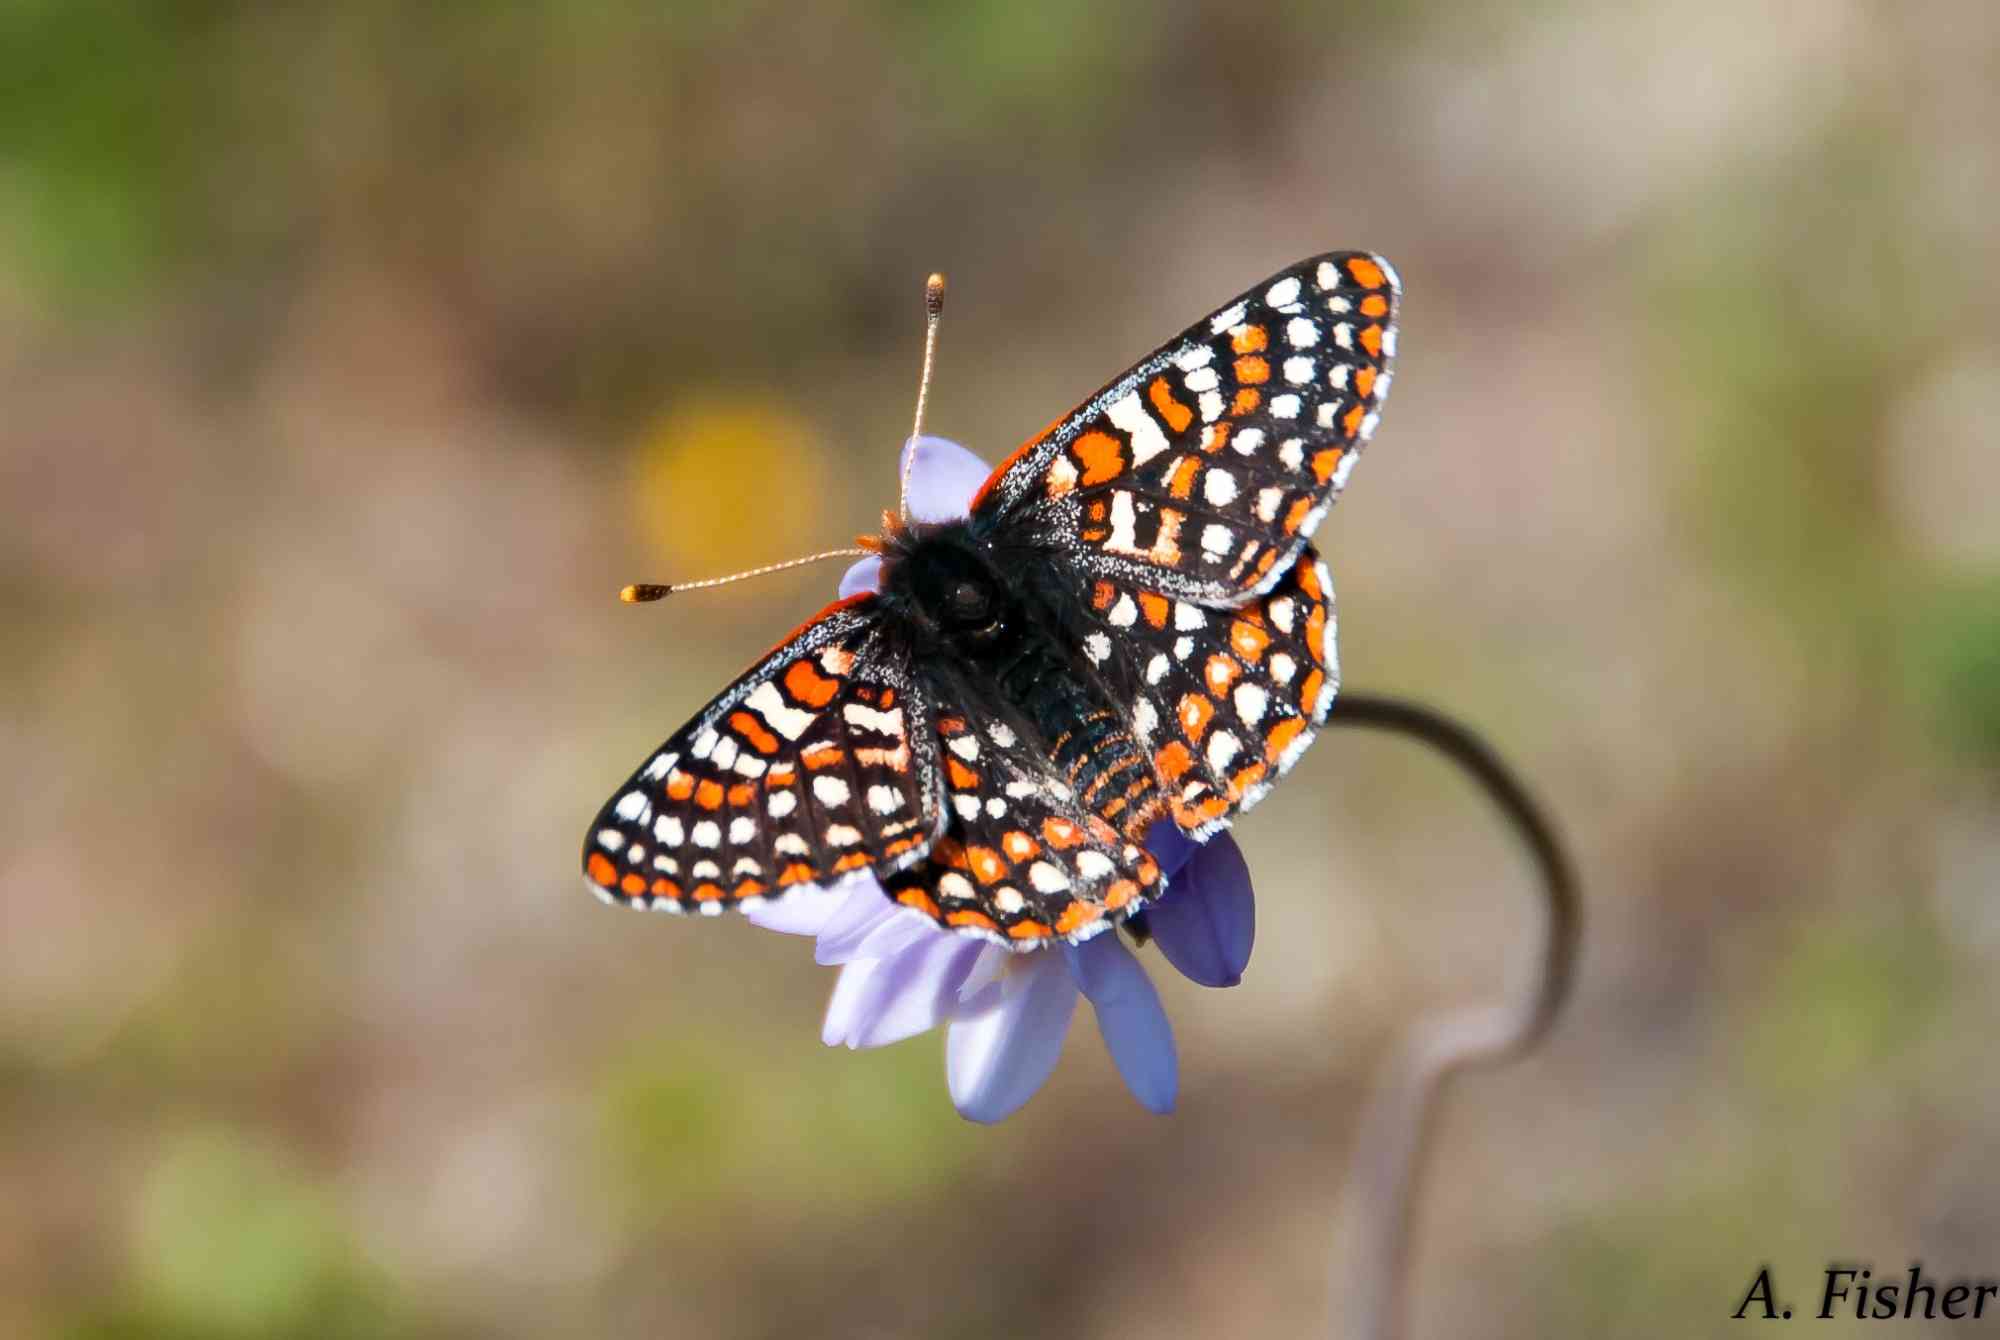 2013.03.14 - Quino Checkspot Butterfly - Sitting on Flower - Pacific Southwest - Andrew Fisher USFWS _ CC BY 2.0 DEED